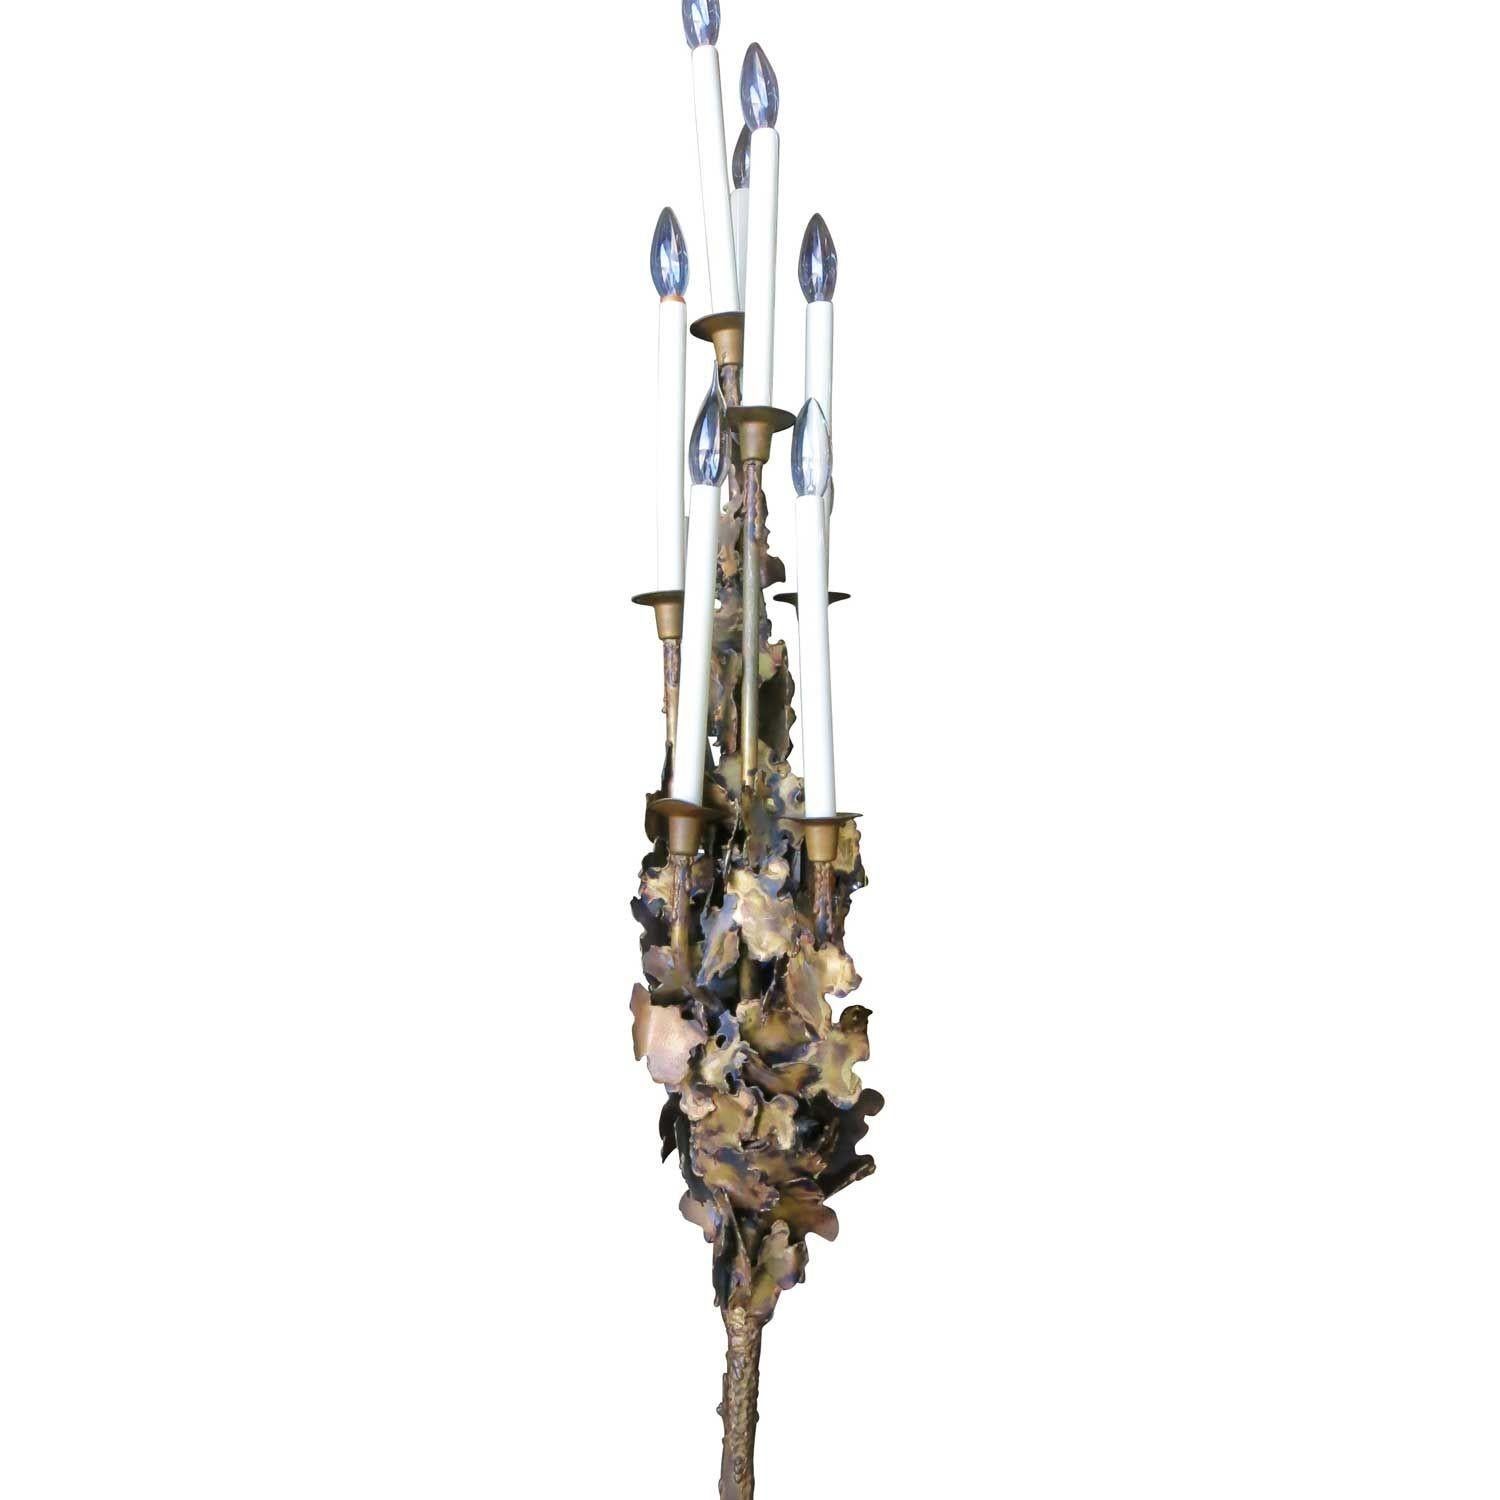 Tom Greene Style Brutalist Torch-Cut Brass Torchiere Floor Lamp In Excellent Condition For Sale In Van Nuys, CA